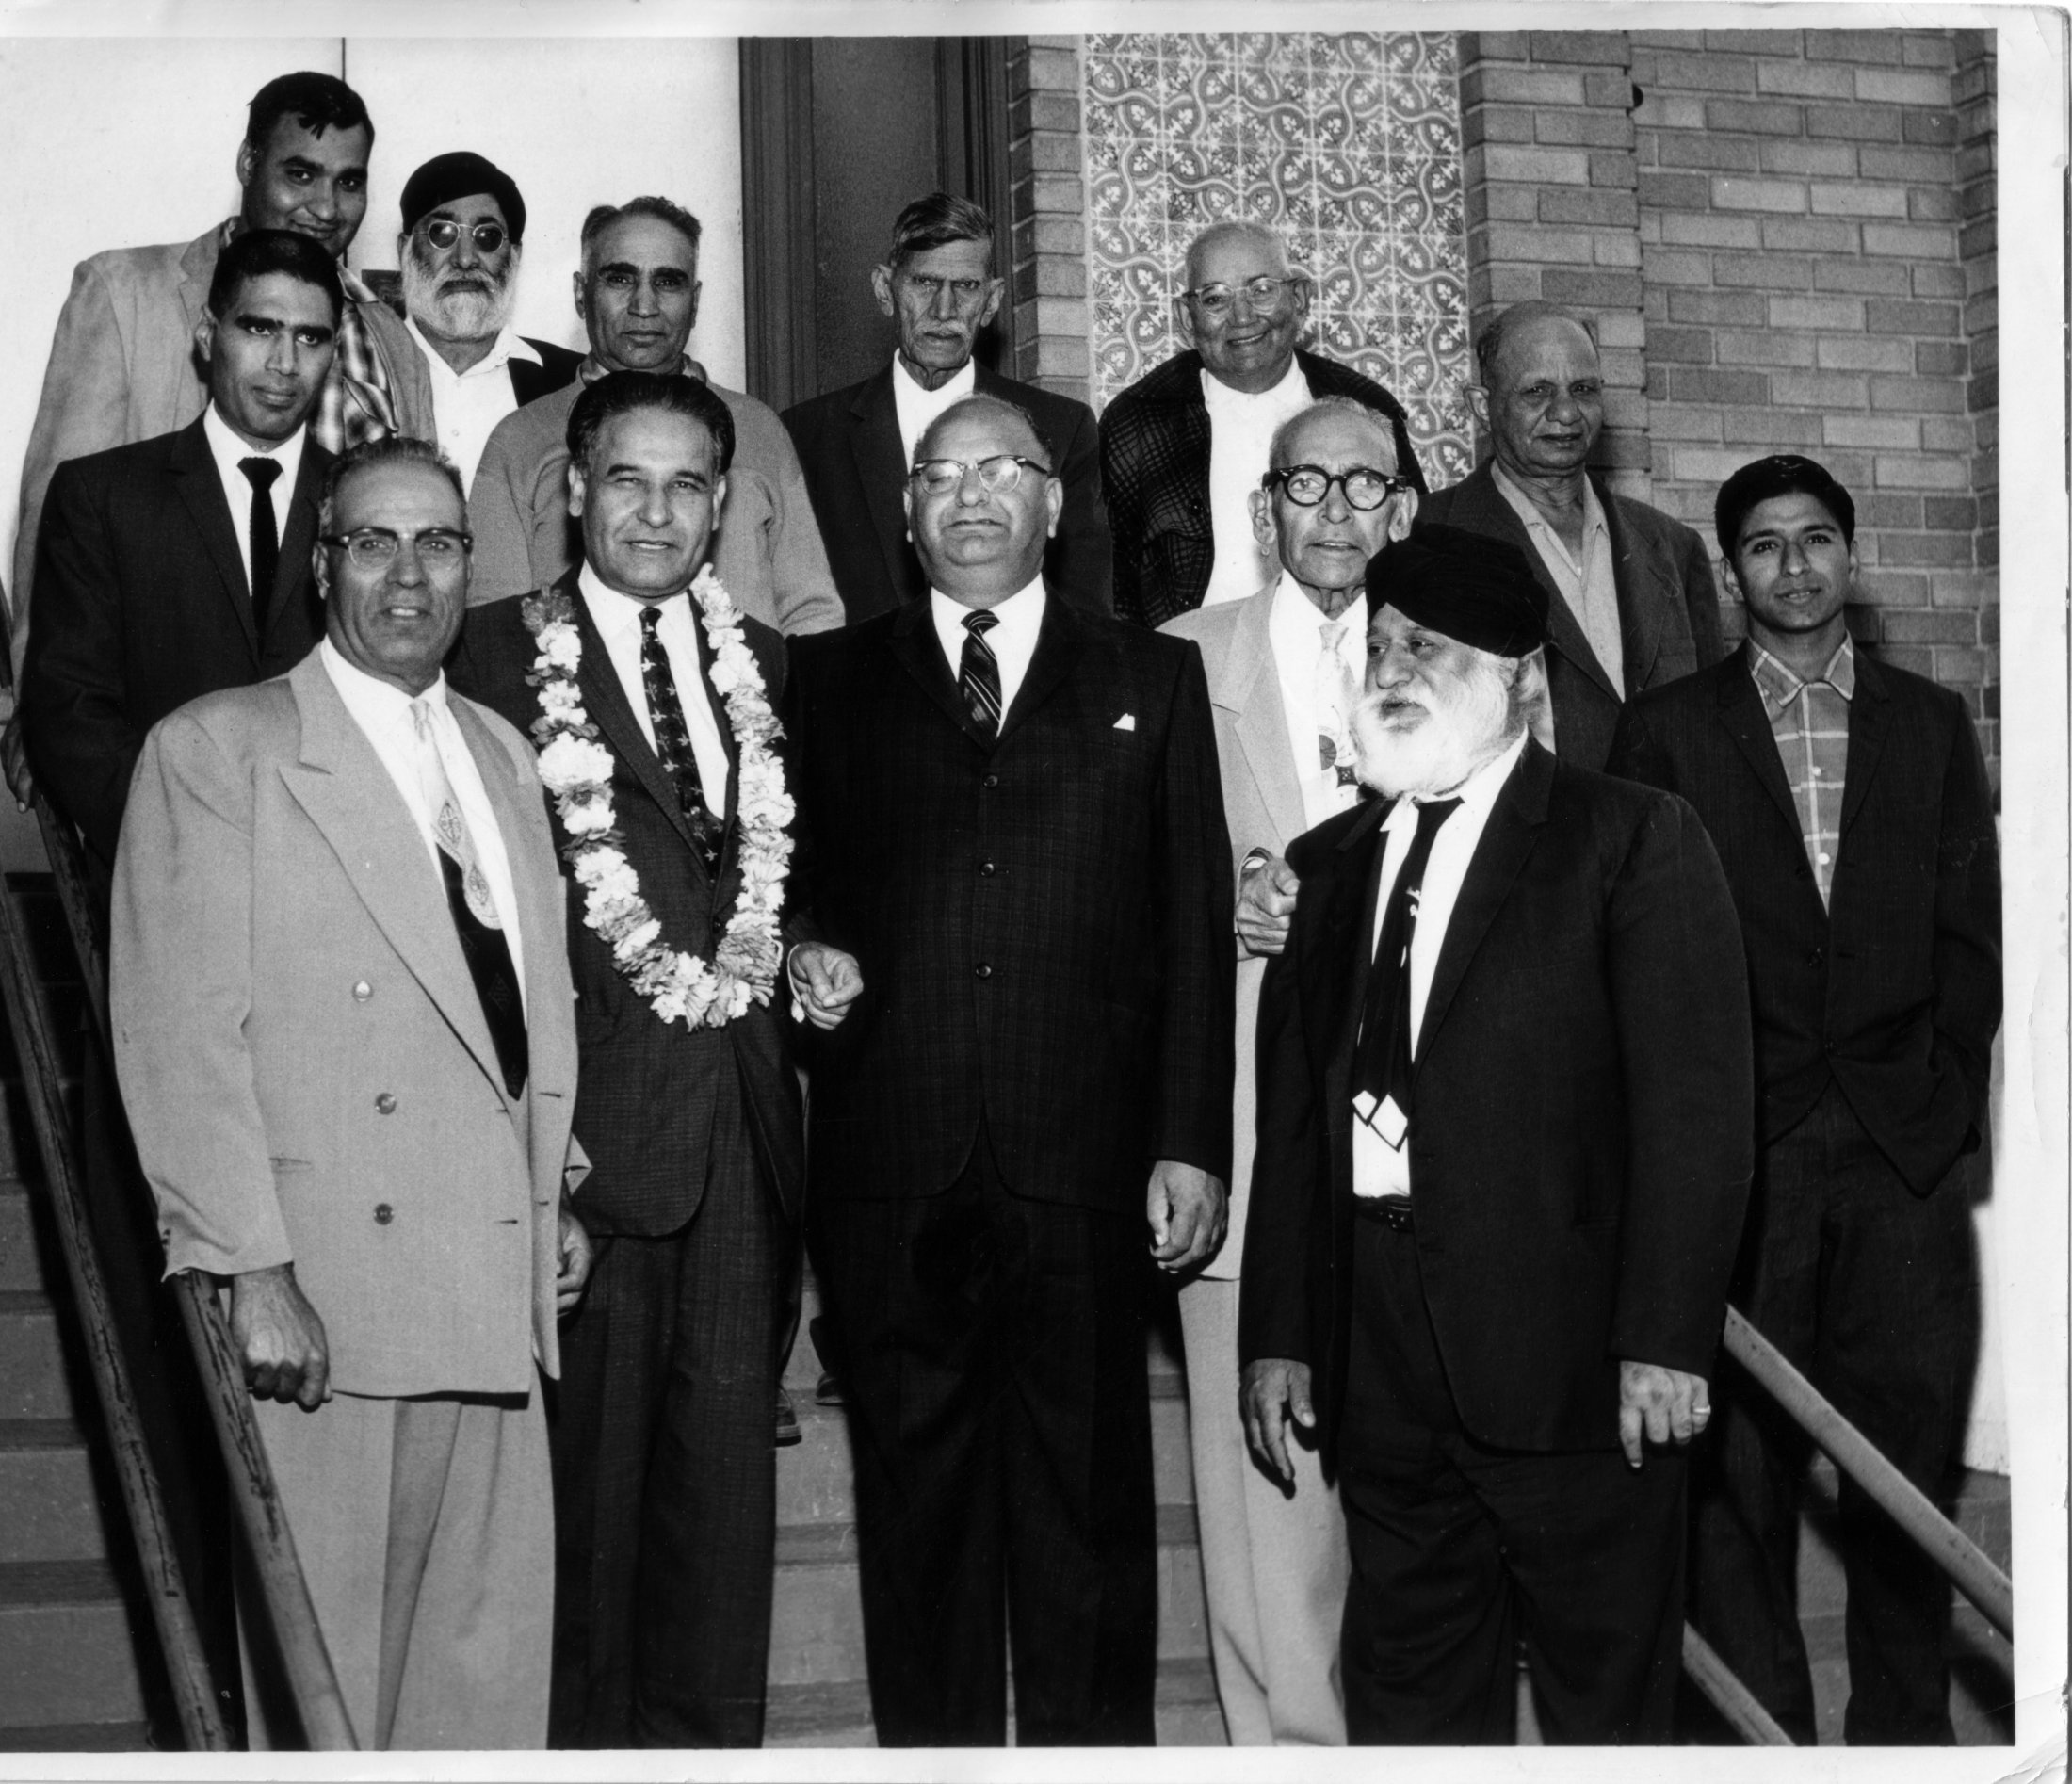 Tuly Singh Johl with Dalip Singh Saund (Center Left With Garland). Courtesy of the Johl Family and the Punjabi American Heritage Society.